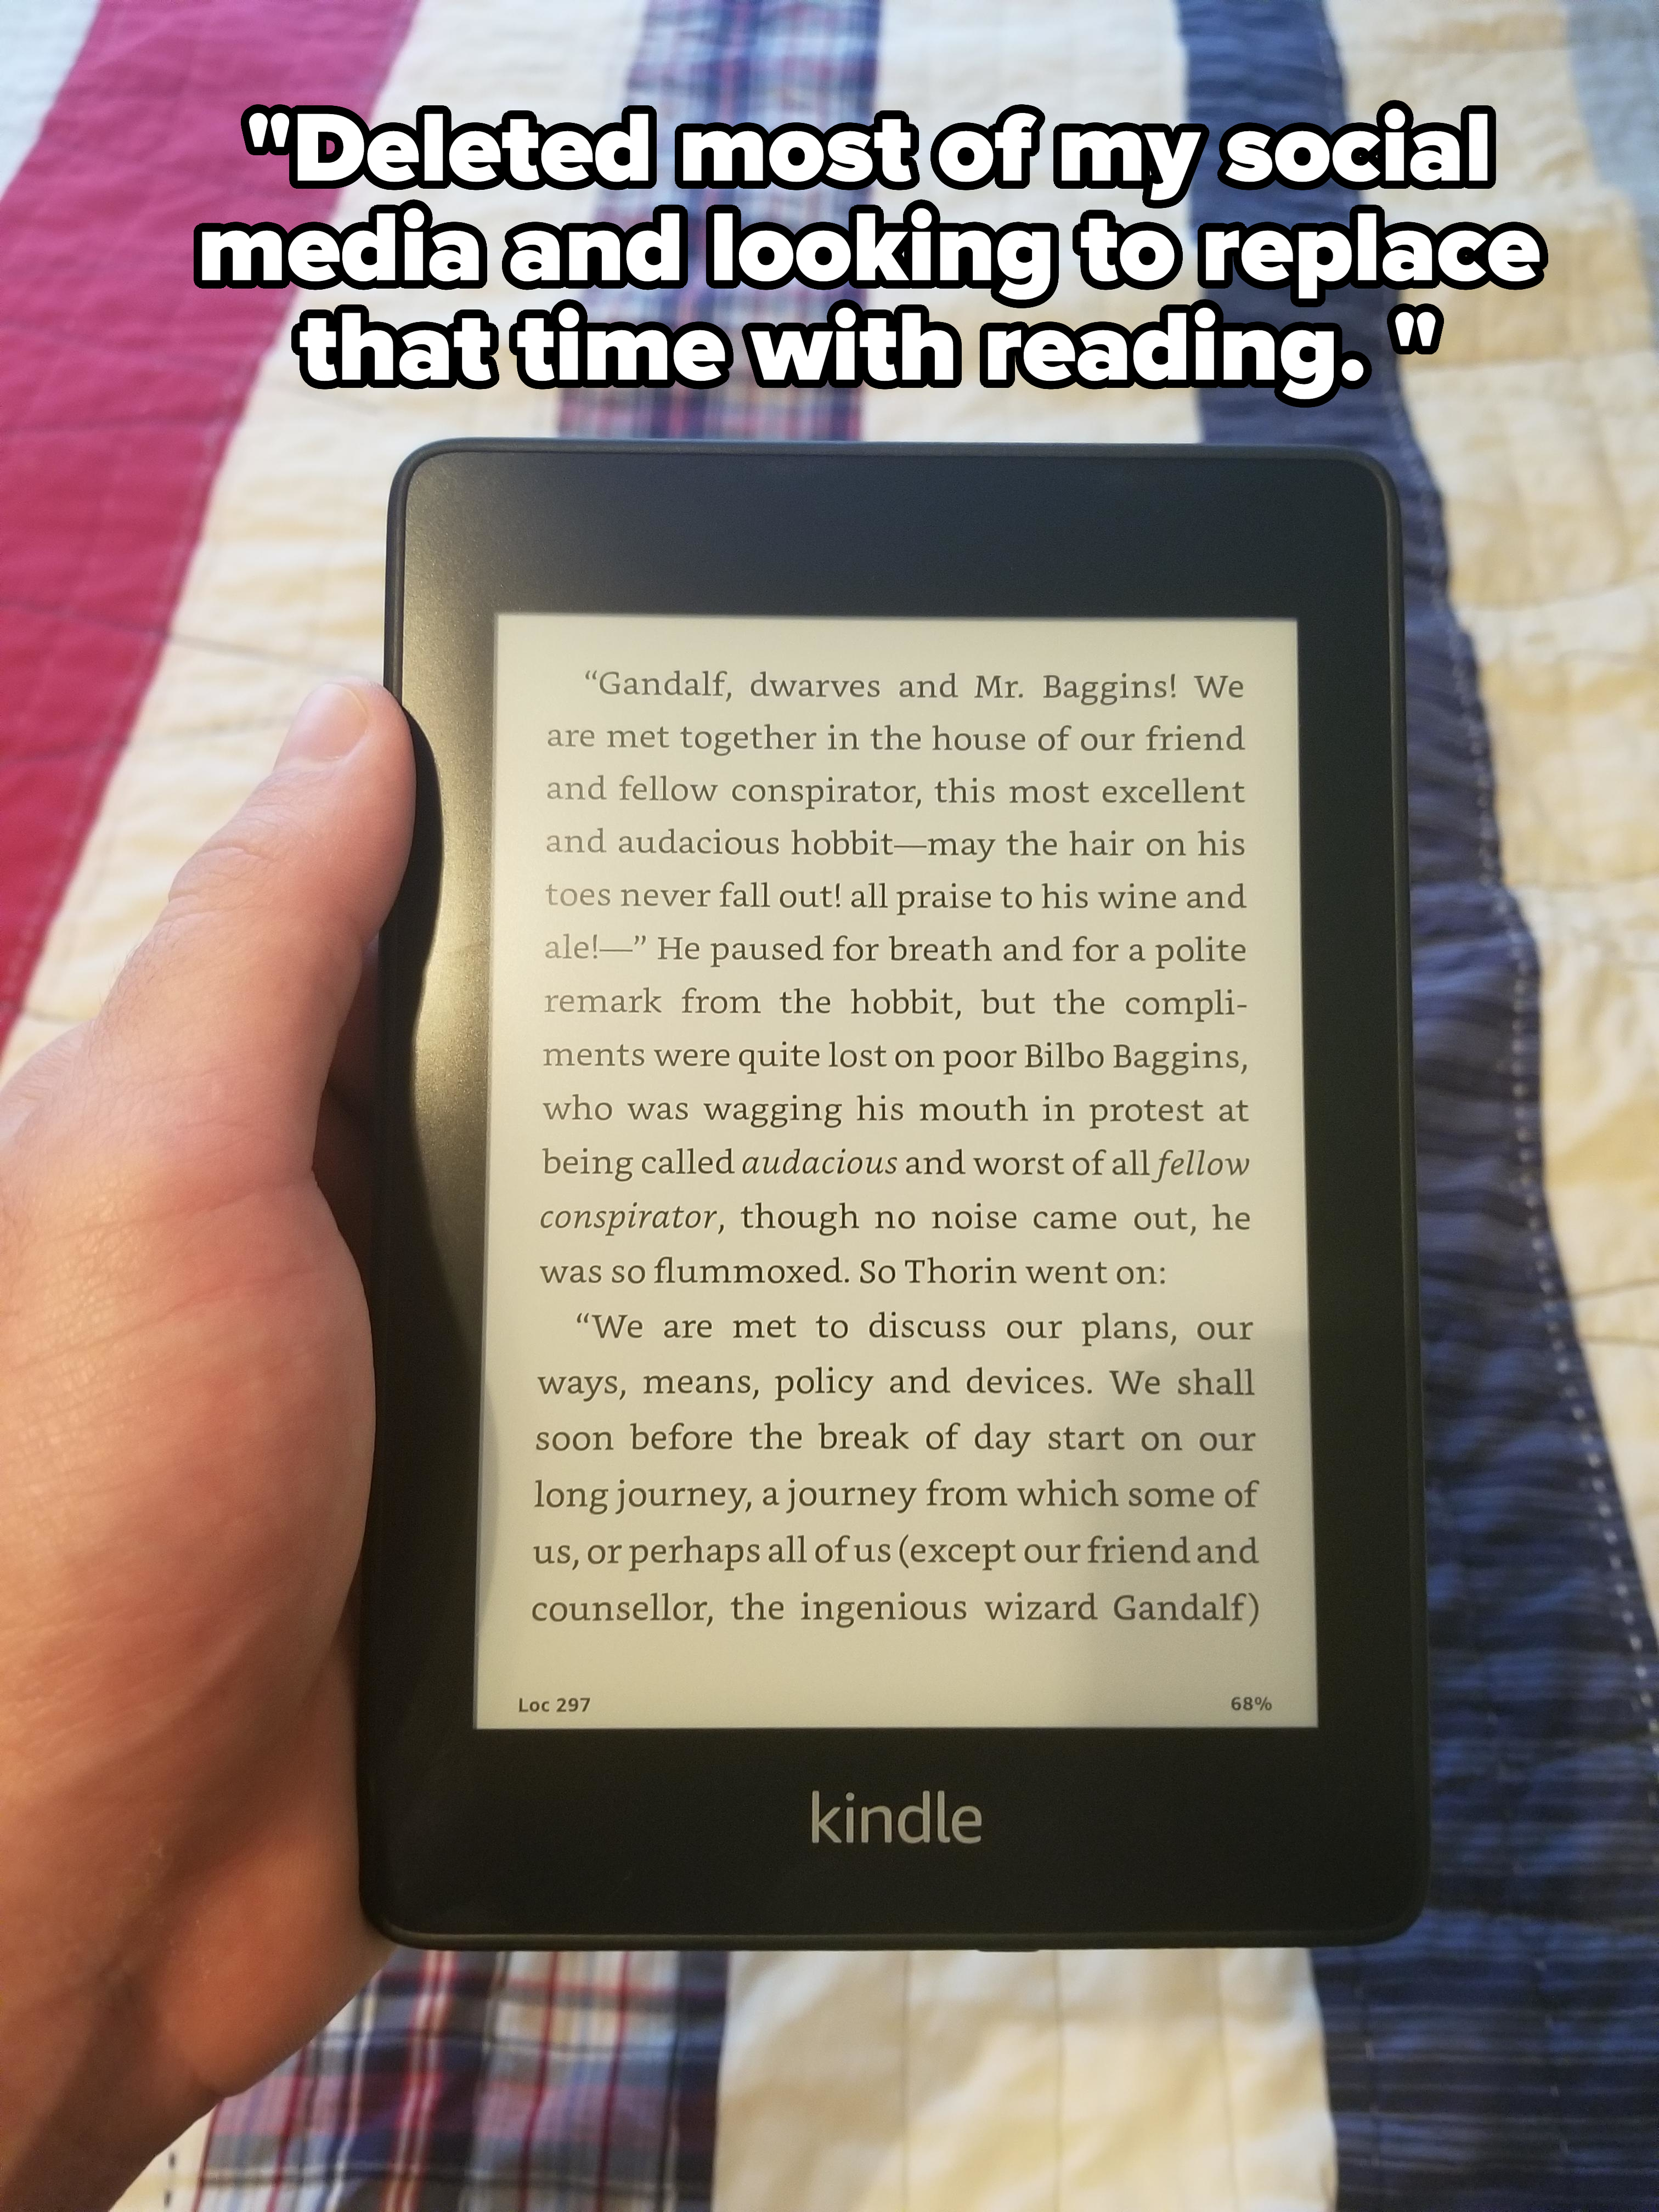 Hand holding a Kindle displaying a page from &quot;The Lord of the Rings&quot; with a text passage about Gandalf and Mr. Baggins